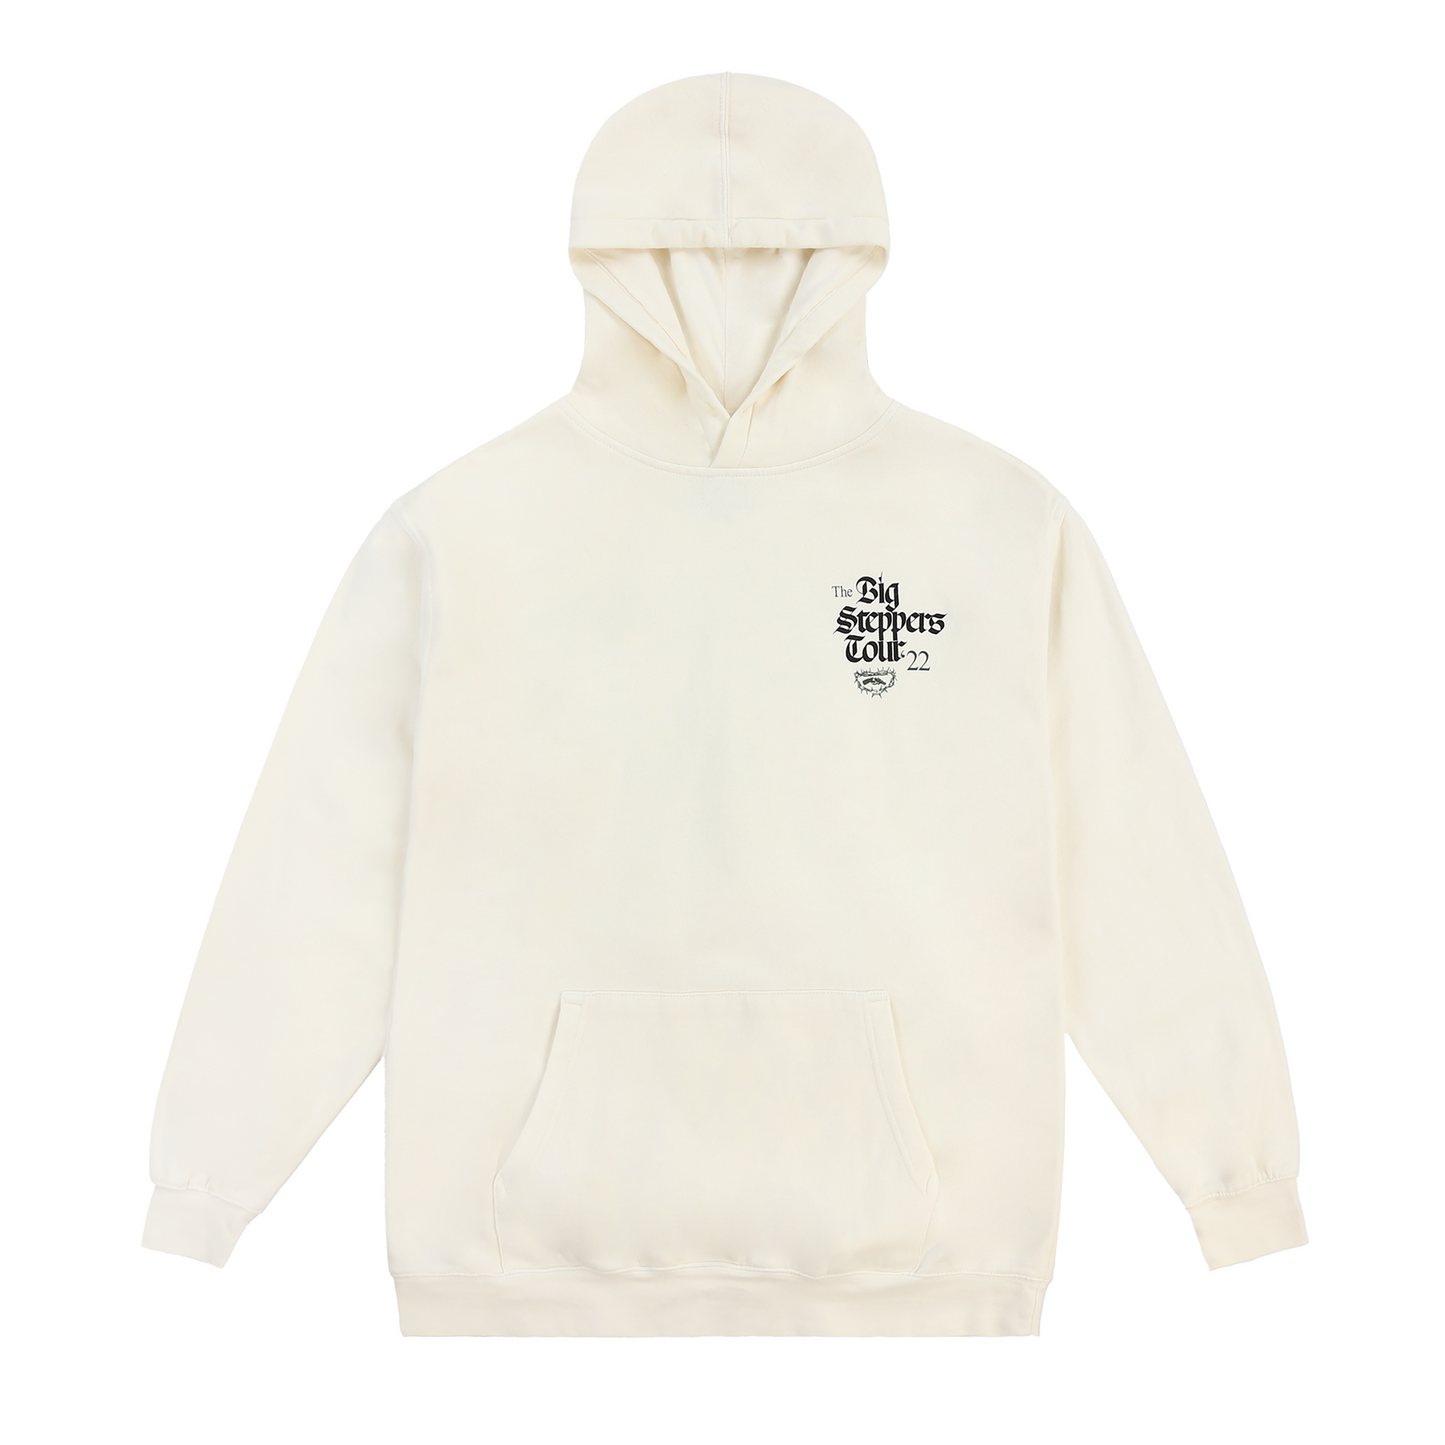 The Big Steppers Tour Hoodie - Cream